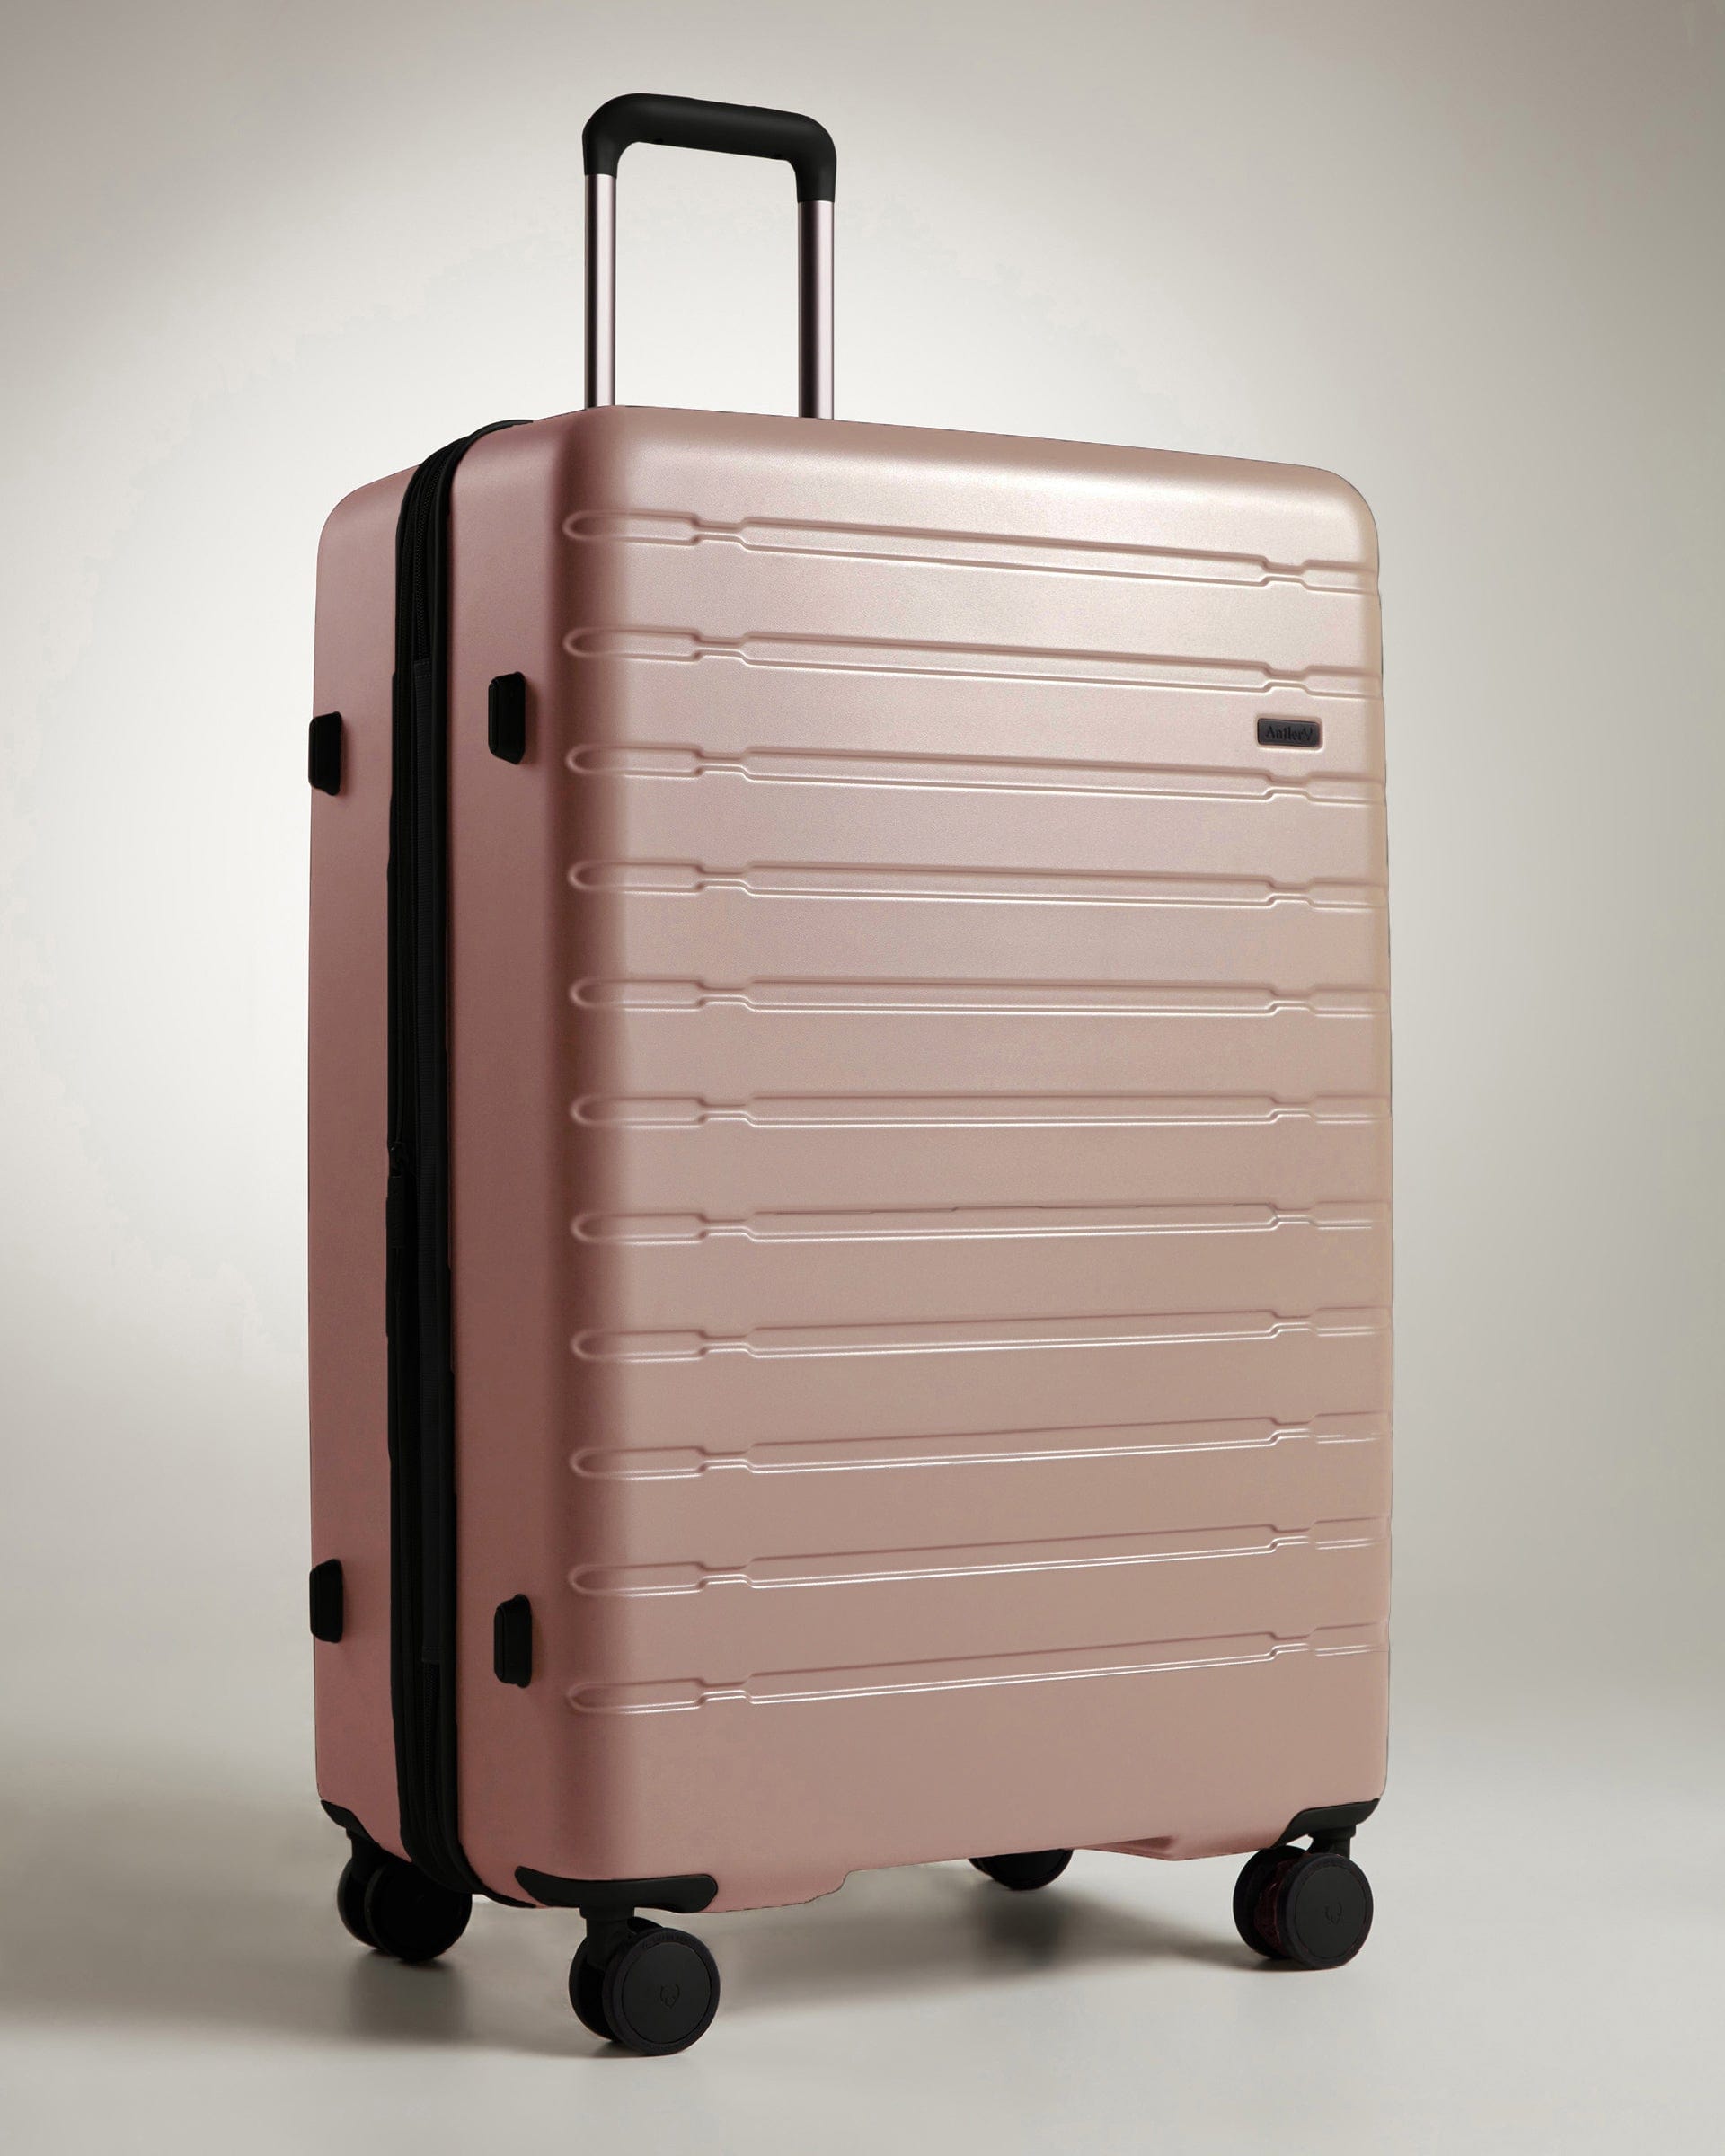 View Antler Stamford Large Suitcase In Putty Size 815 x 54 x 345 cm information